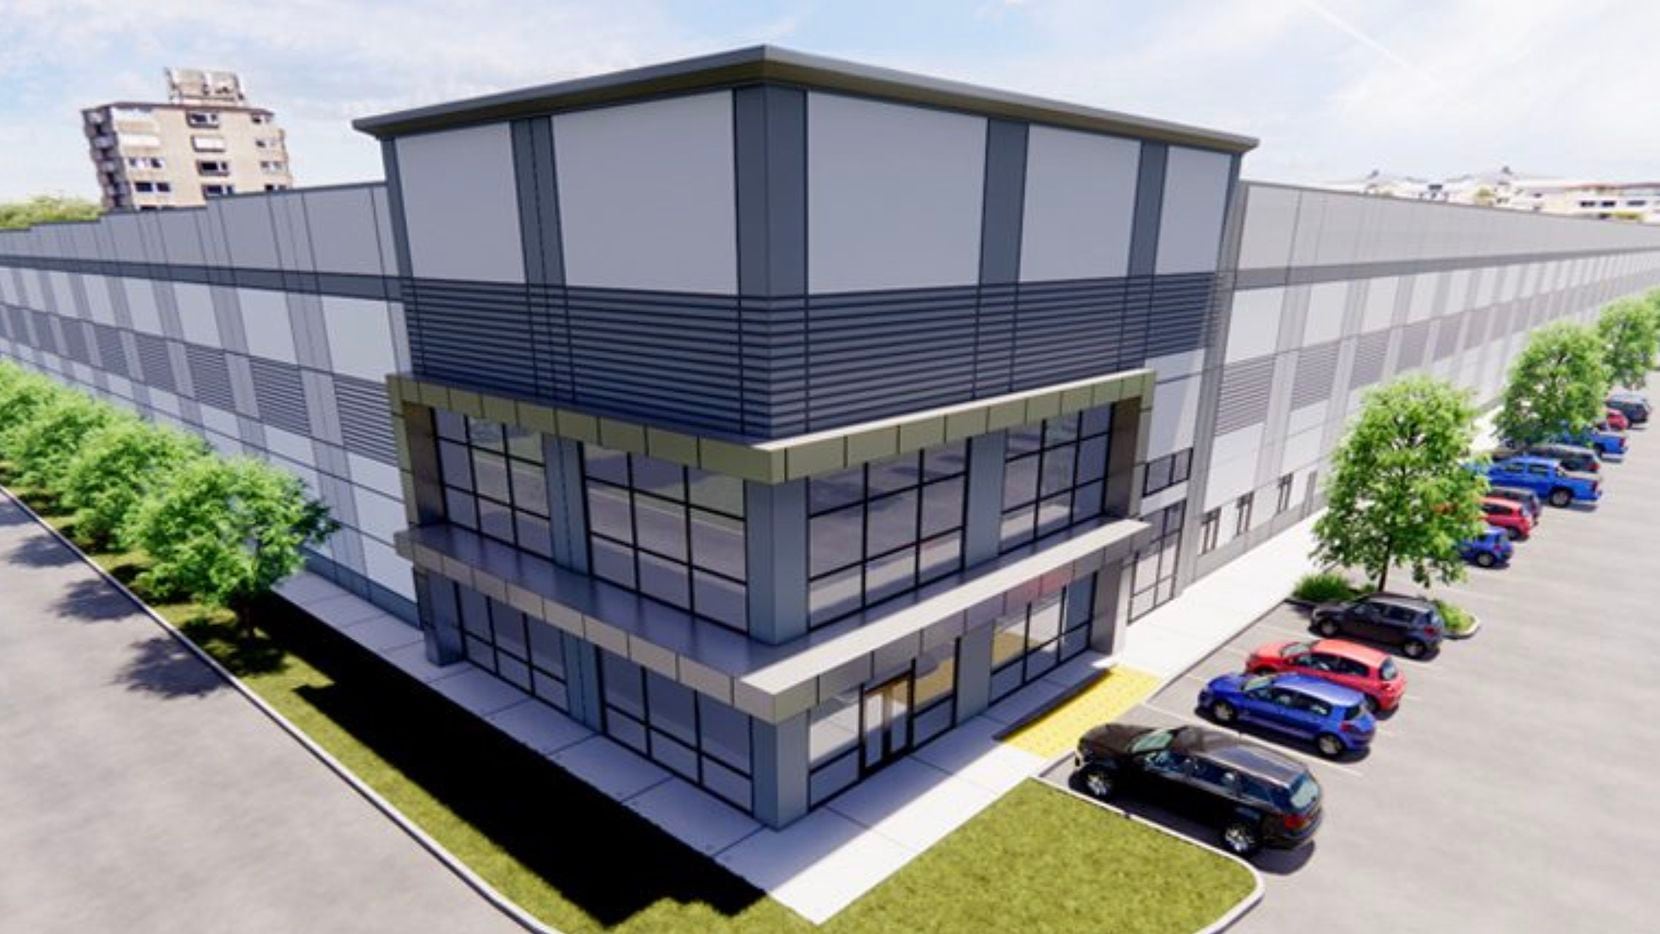 Construction firm ARCO/Murray is building a four-warehouse business park in Grapevine.